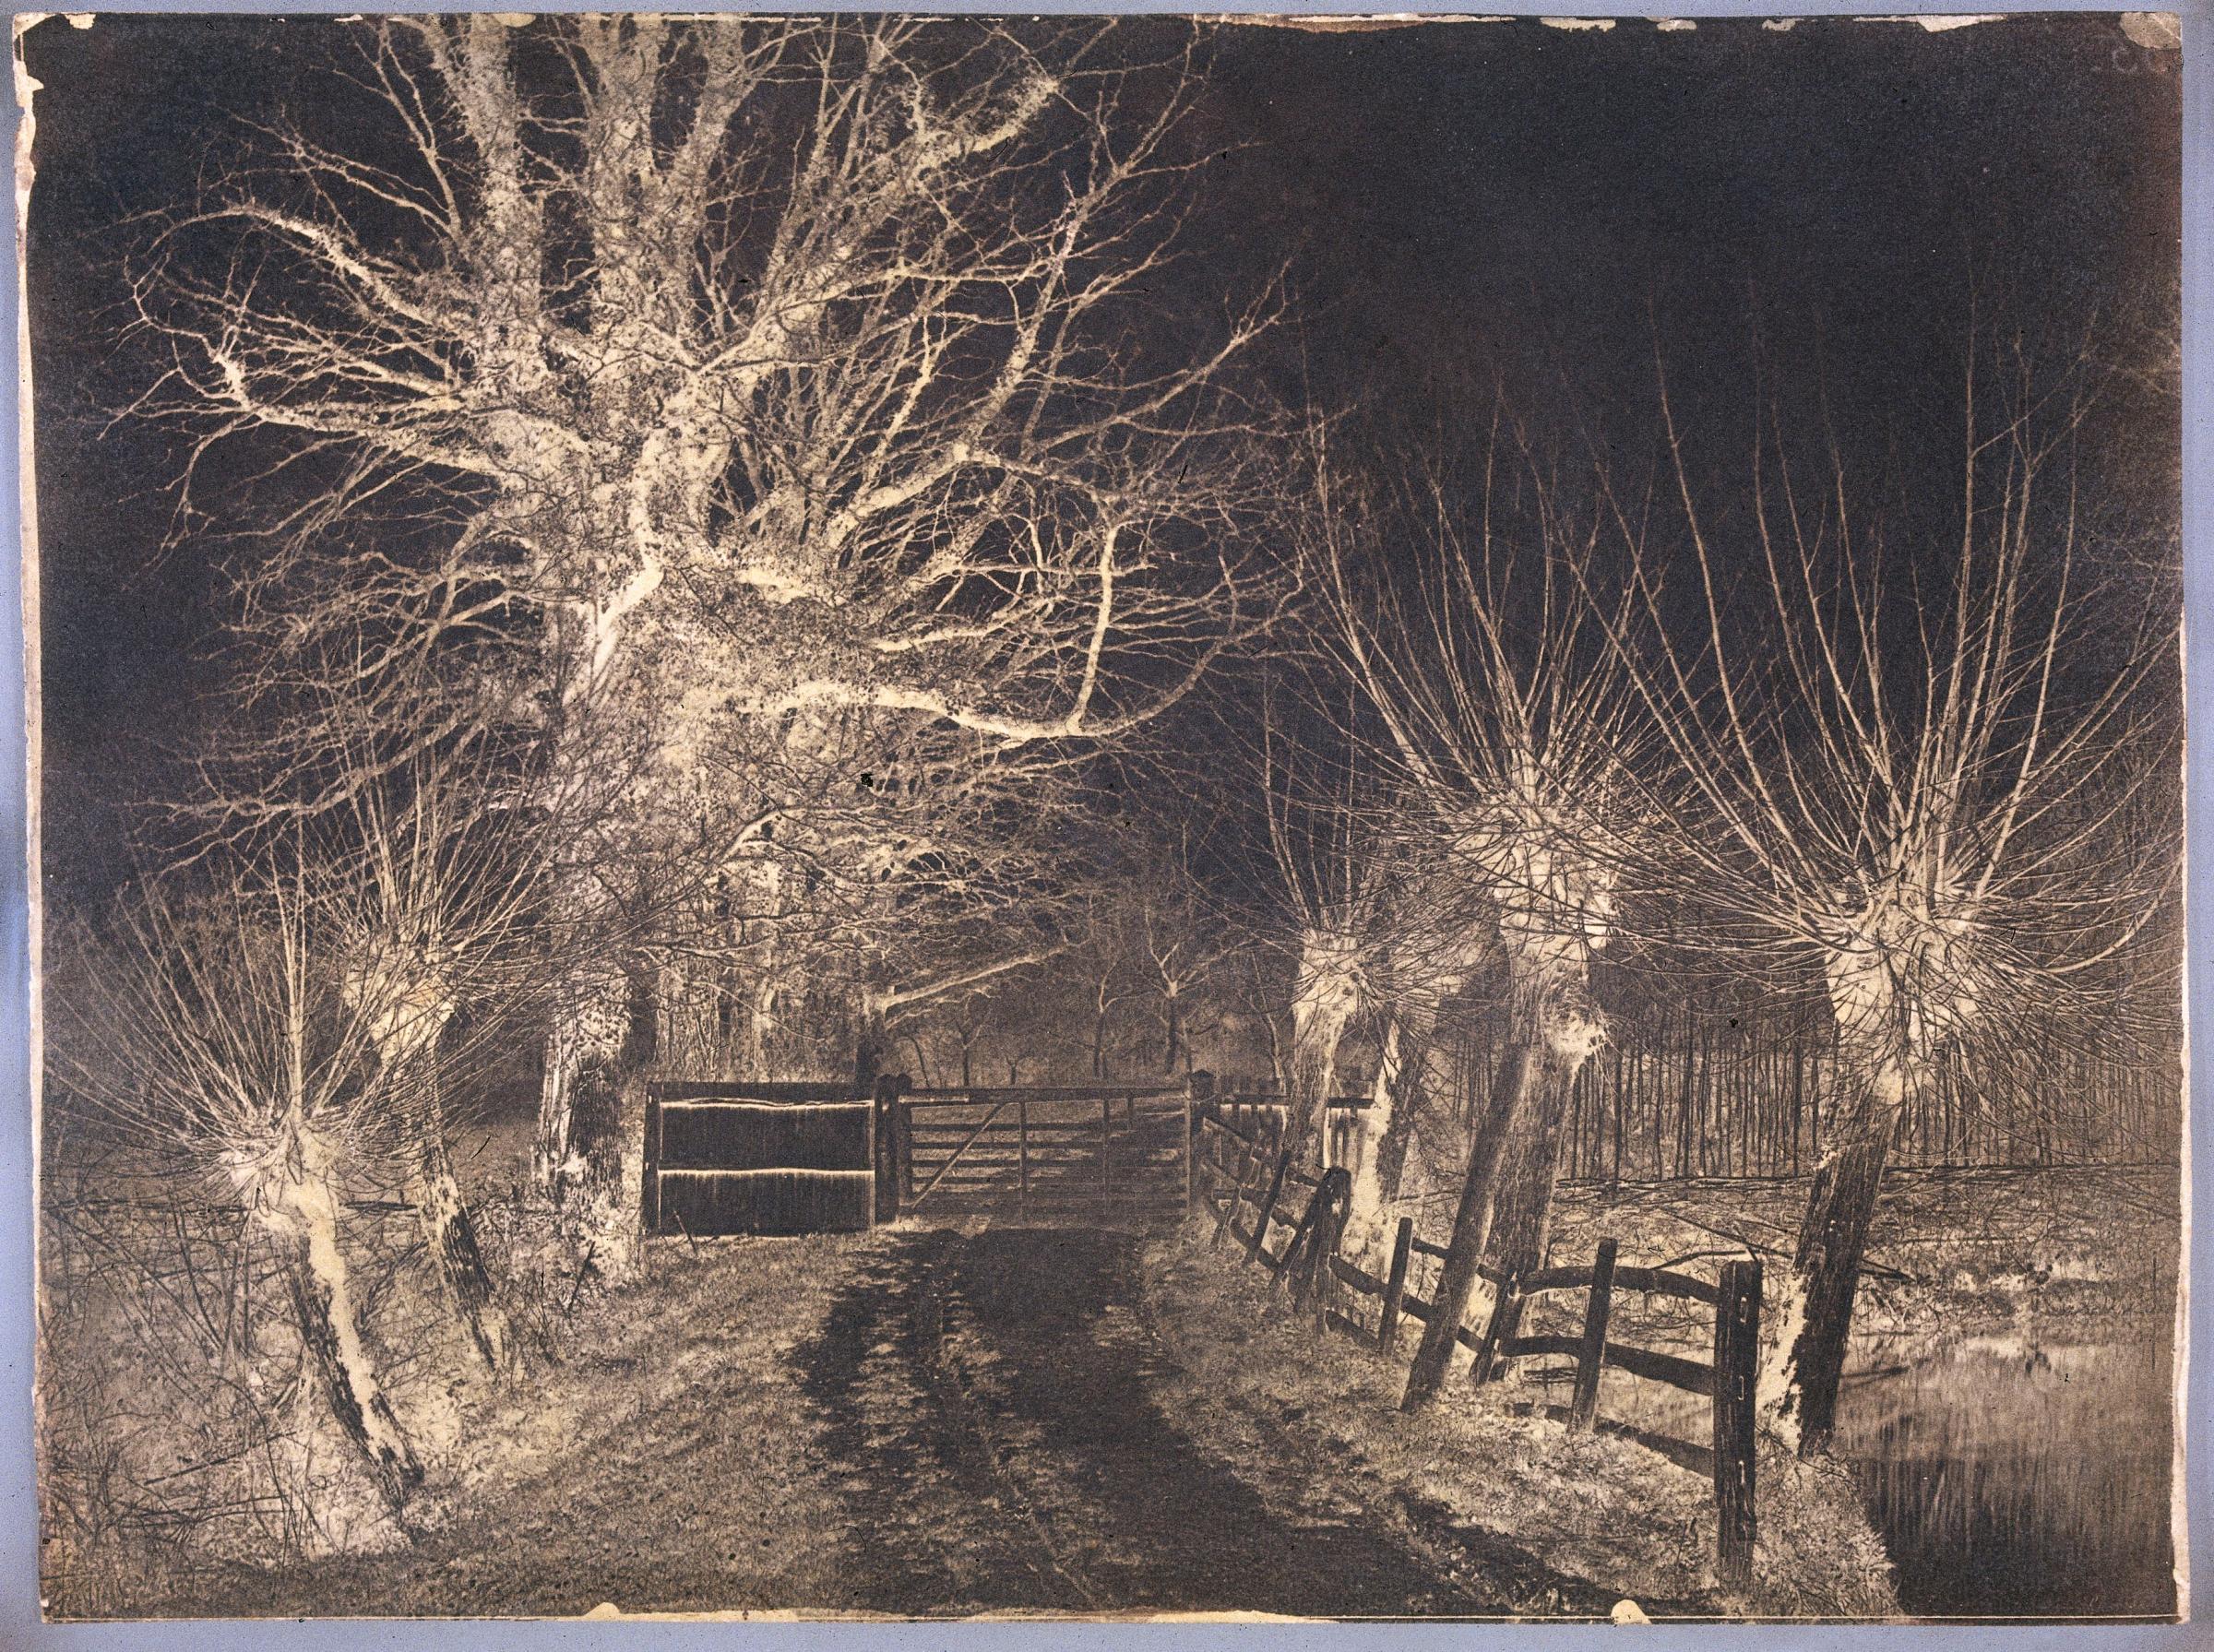 Bare trees, late 19th century.